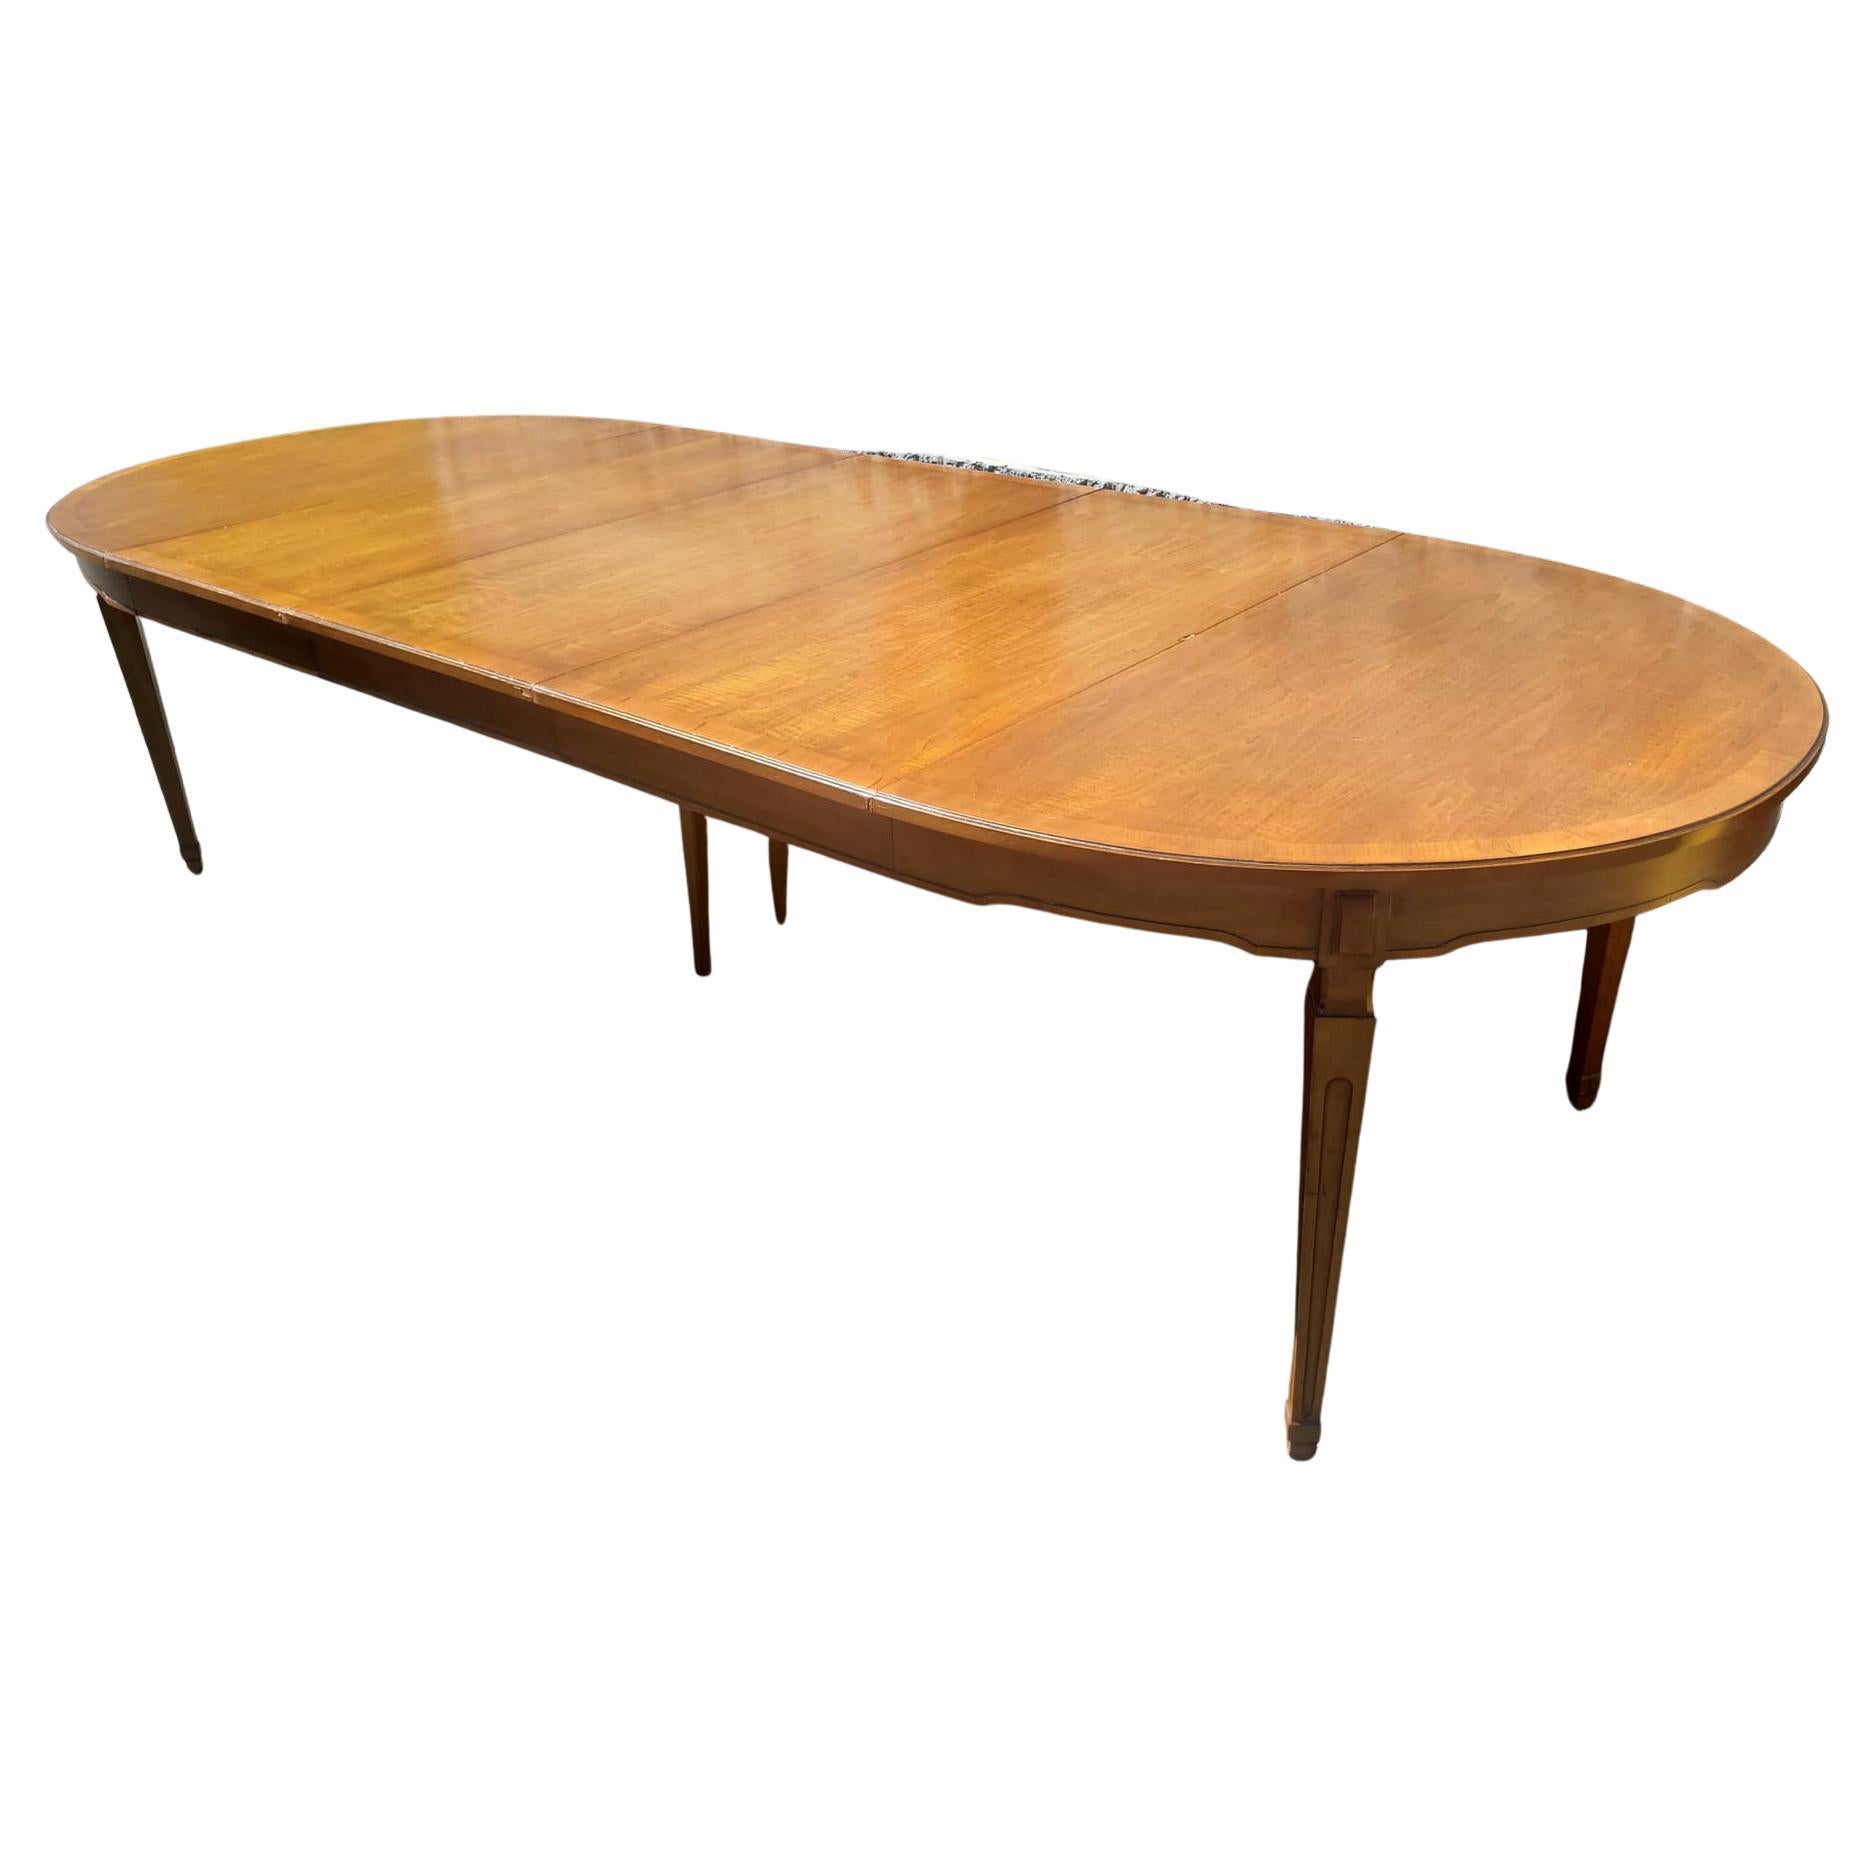 Vintage Henredon oval walnut dining table with banded top. For large or small dining area. Measures 117